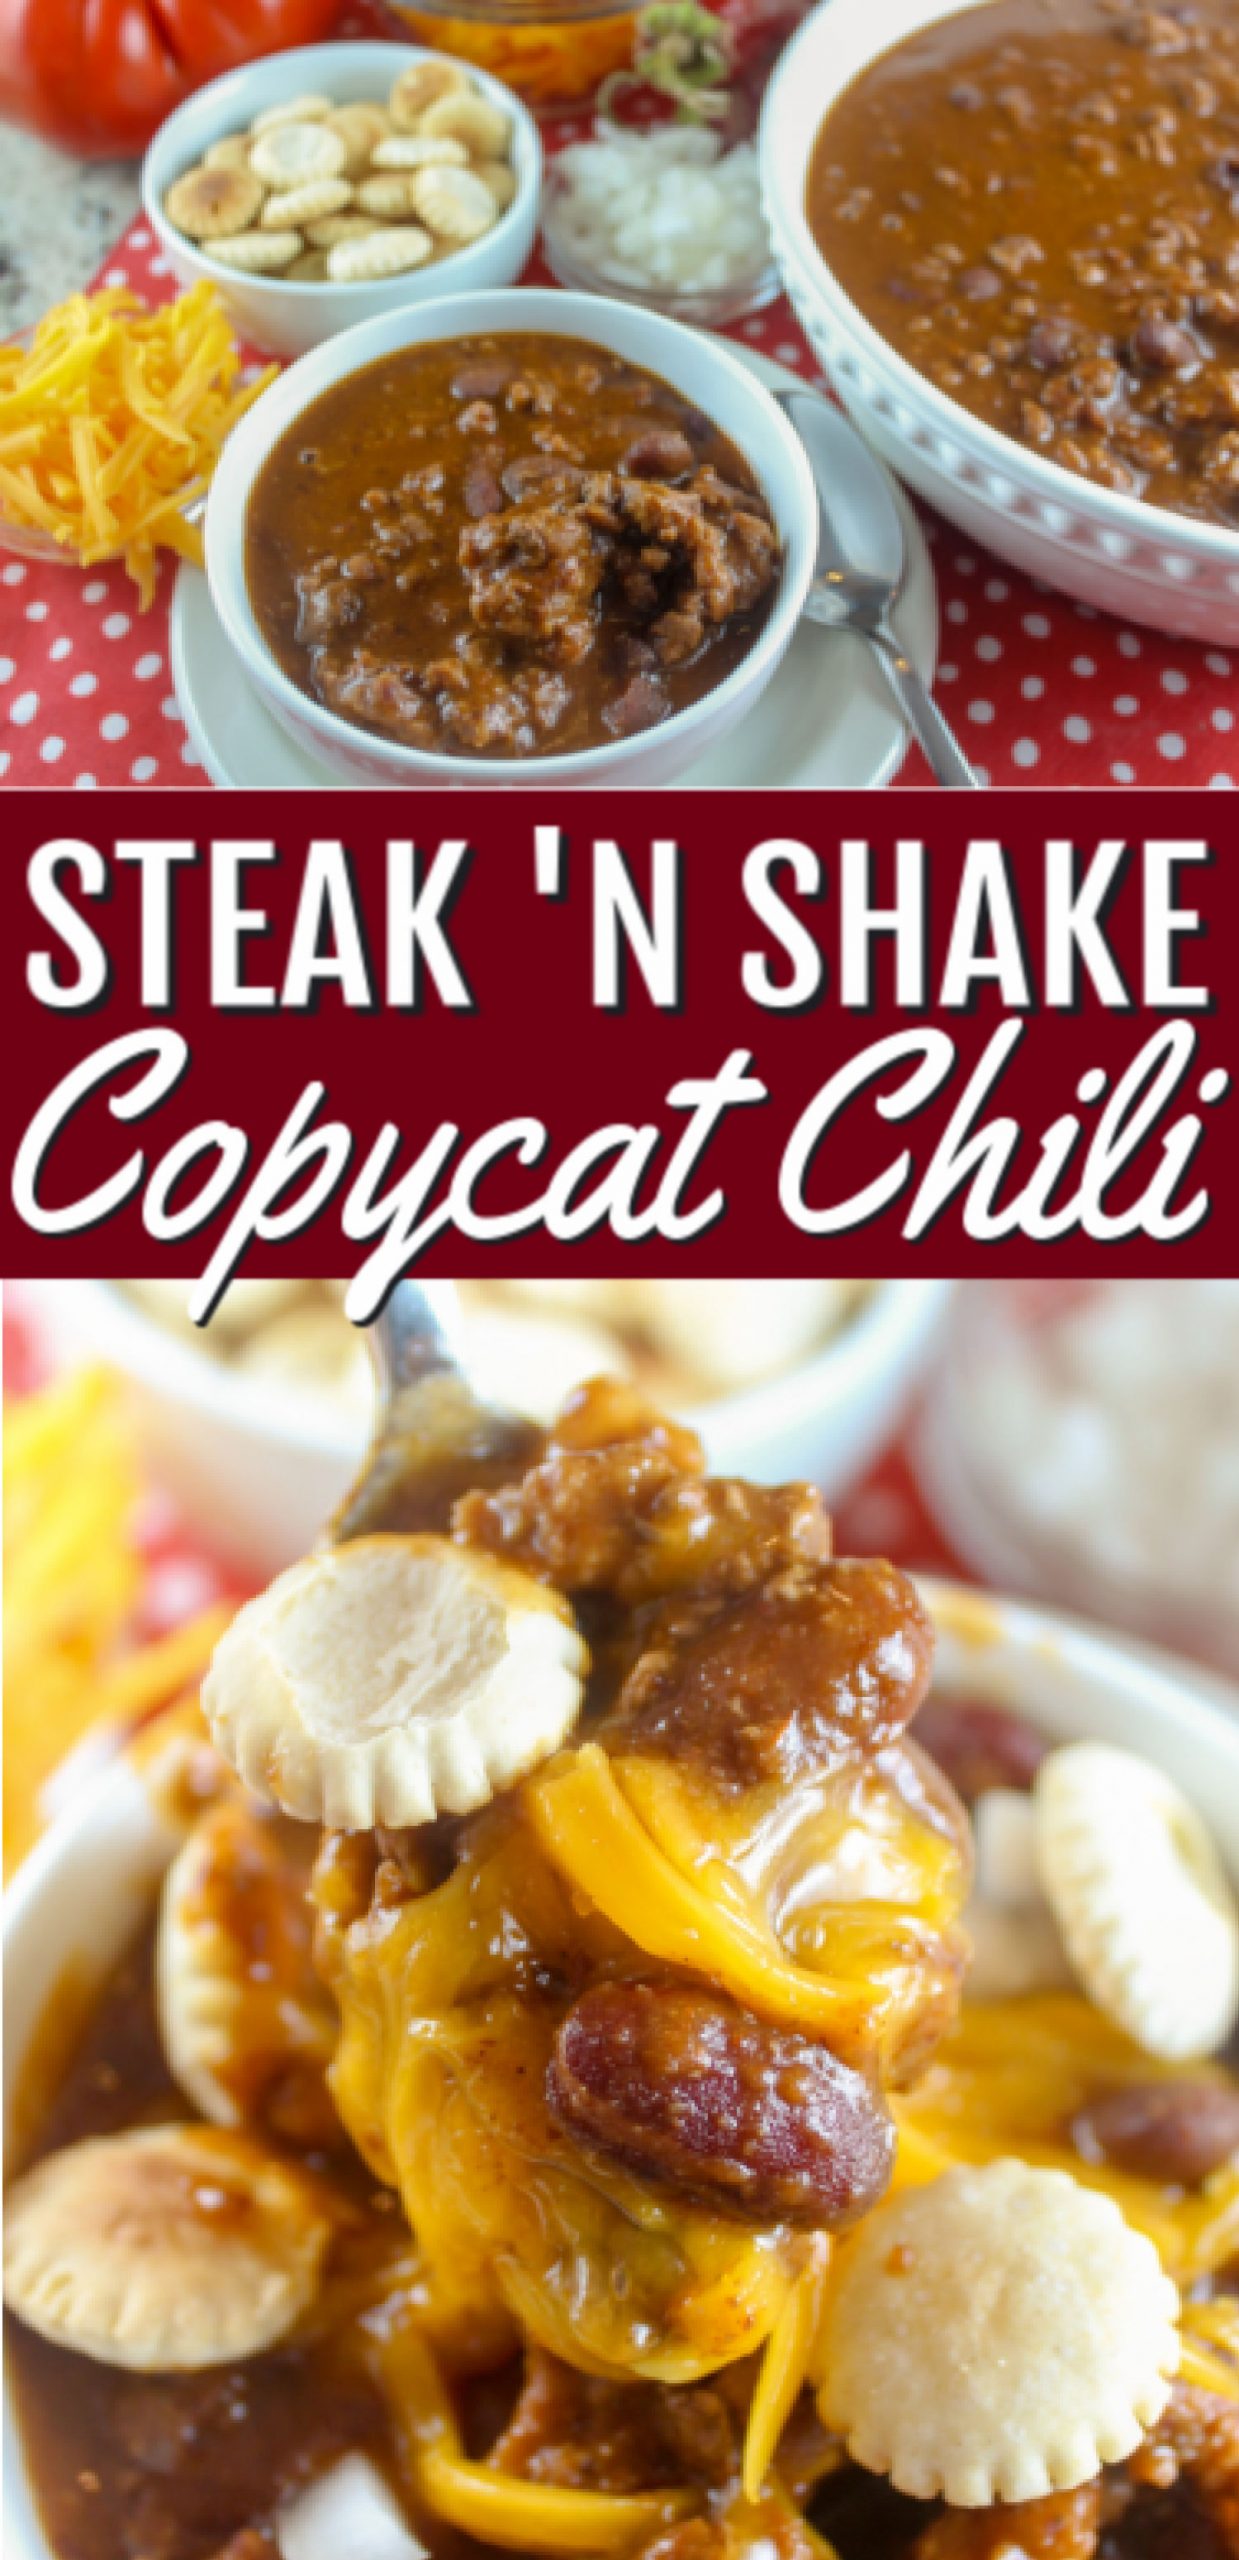 Steak 'N Shake chili is my all-time favorite restaurant chili! It's got a really specific THICK texture - almost a sauce - that is unlike any other. And - after three tries - I FIGURED IT OUT!! I finally made a copycat recipe that is identical to Steak 'N Shake chili! via @foodhussy